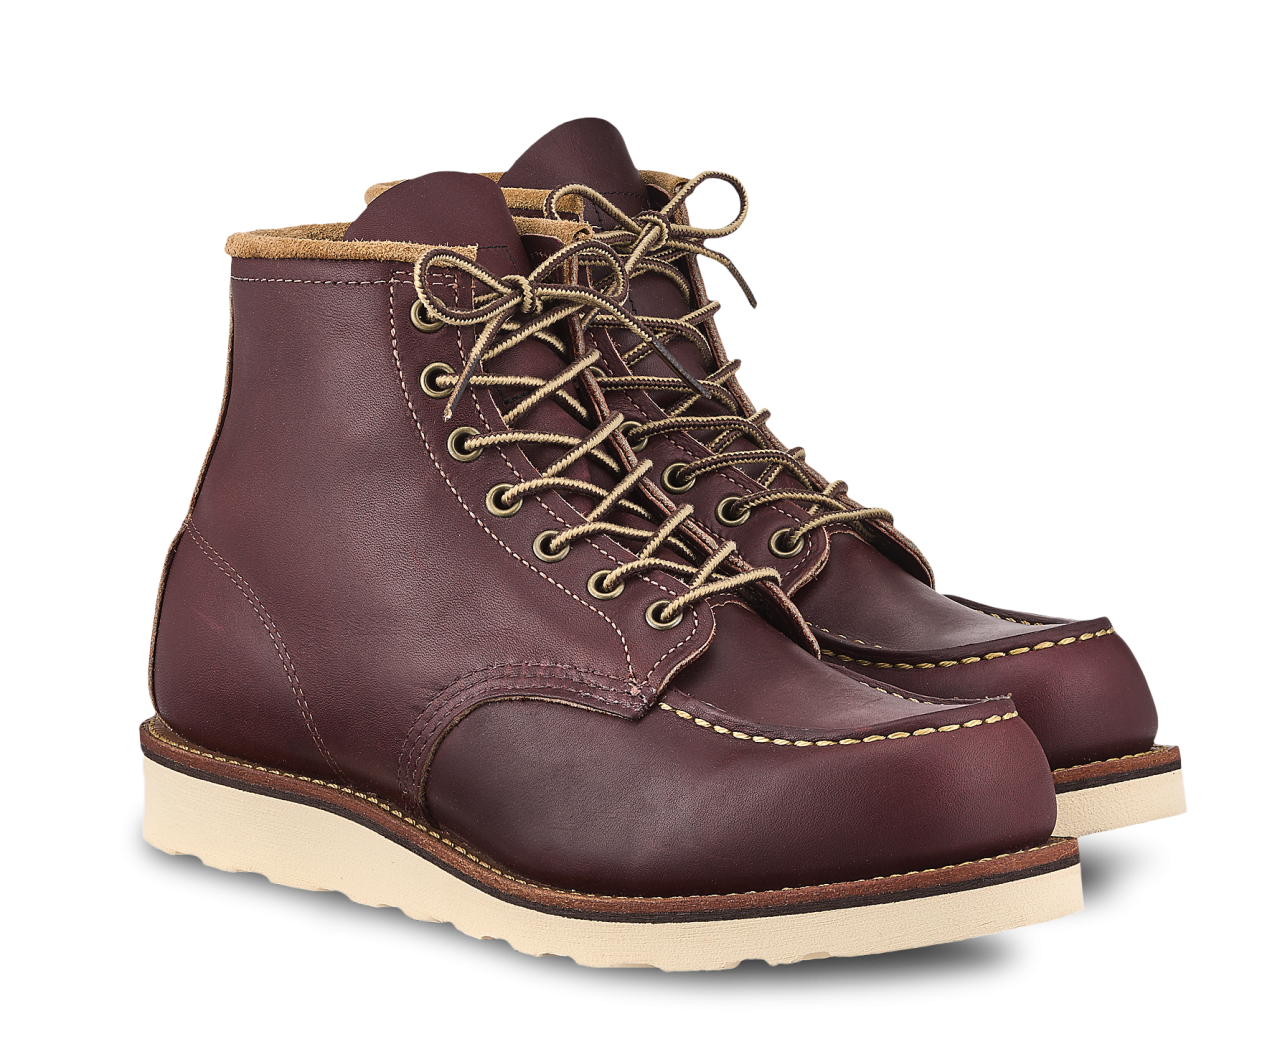 Red Wing 8856 Moc Toe